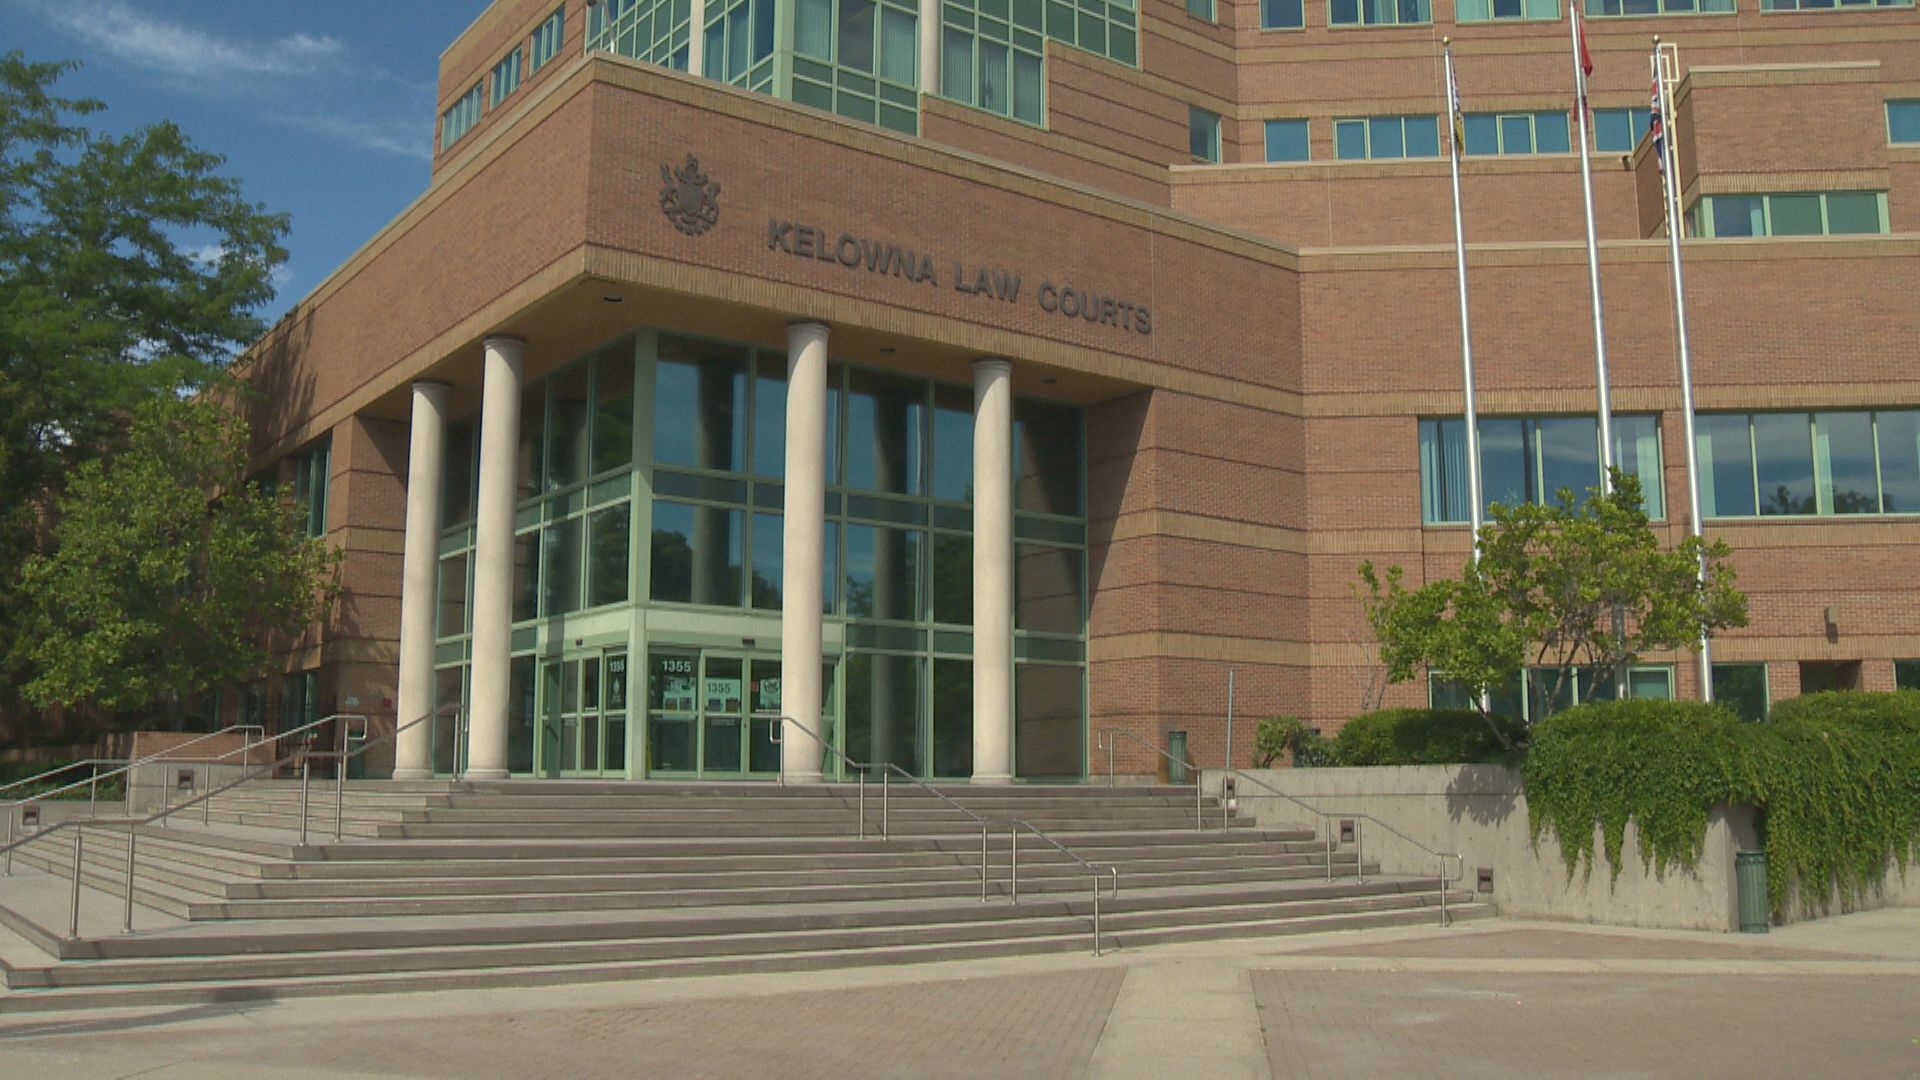 Kelowna RCMP officer takes the stand in assault trial